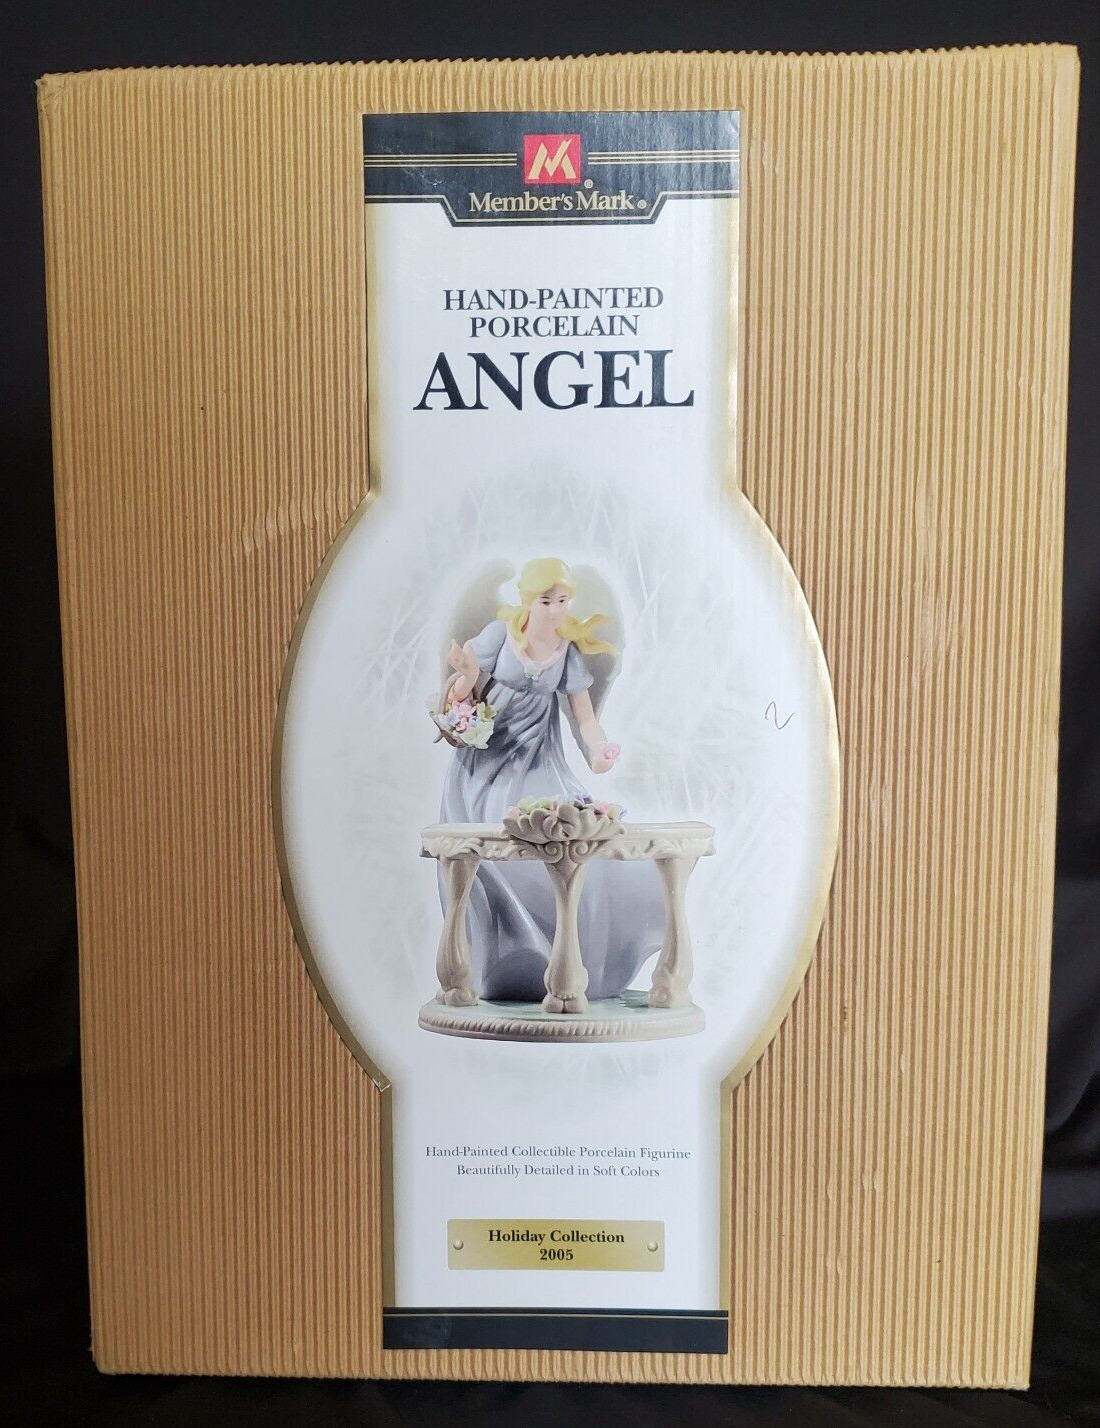 MEMBERS MARK HAND PAINTED PORCELAIN ANGEL FIGURINE 2005 HOLIDAY COLLECTION NEW